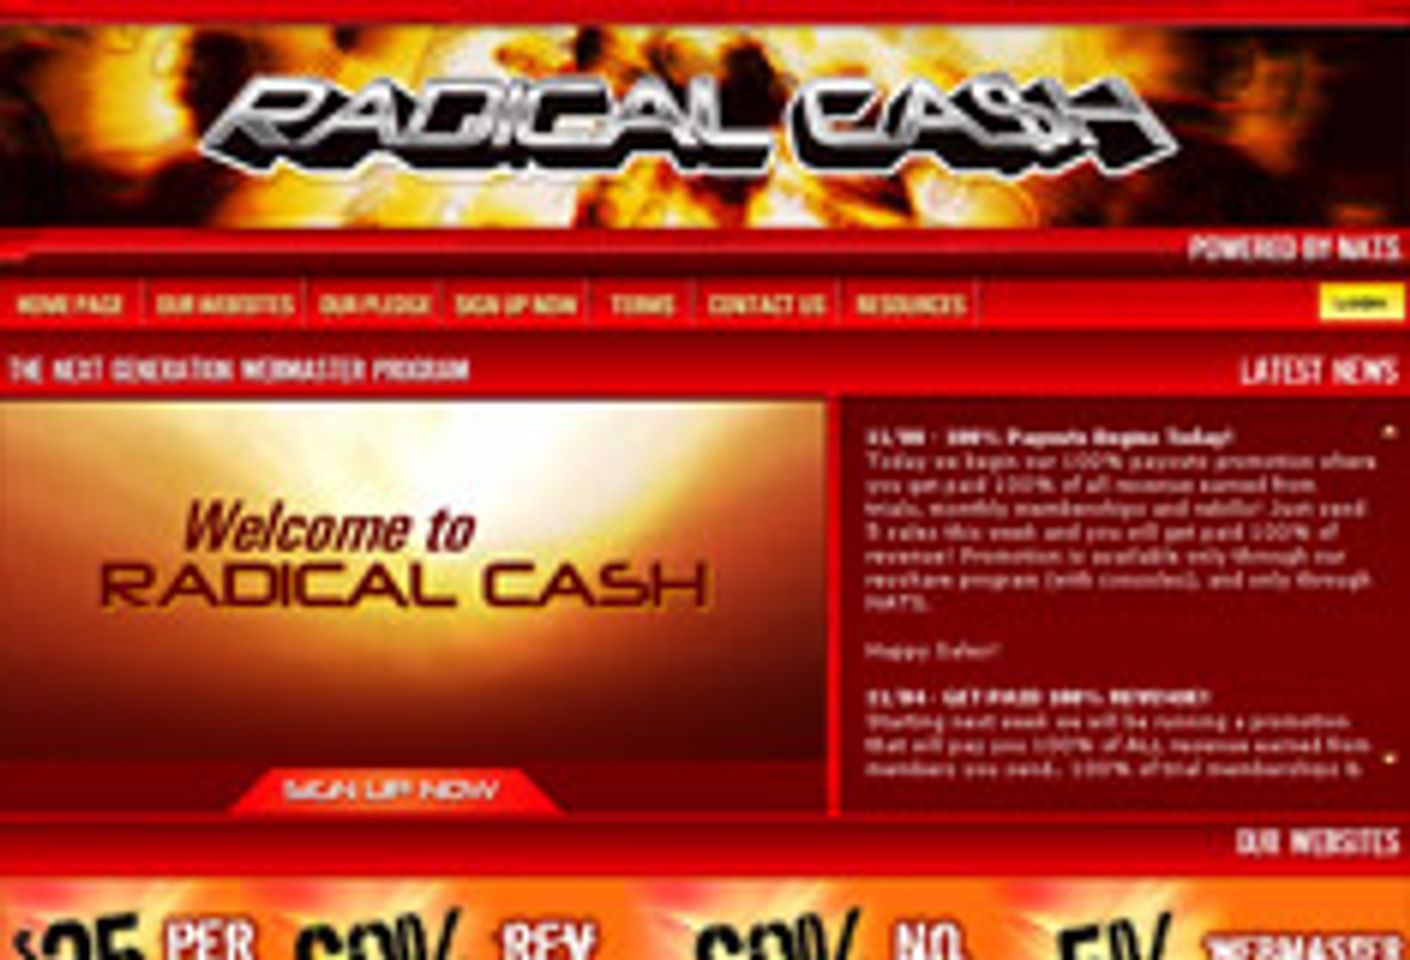 RadicalCash: Take All Our Money